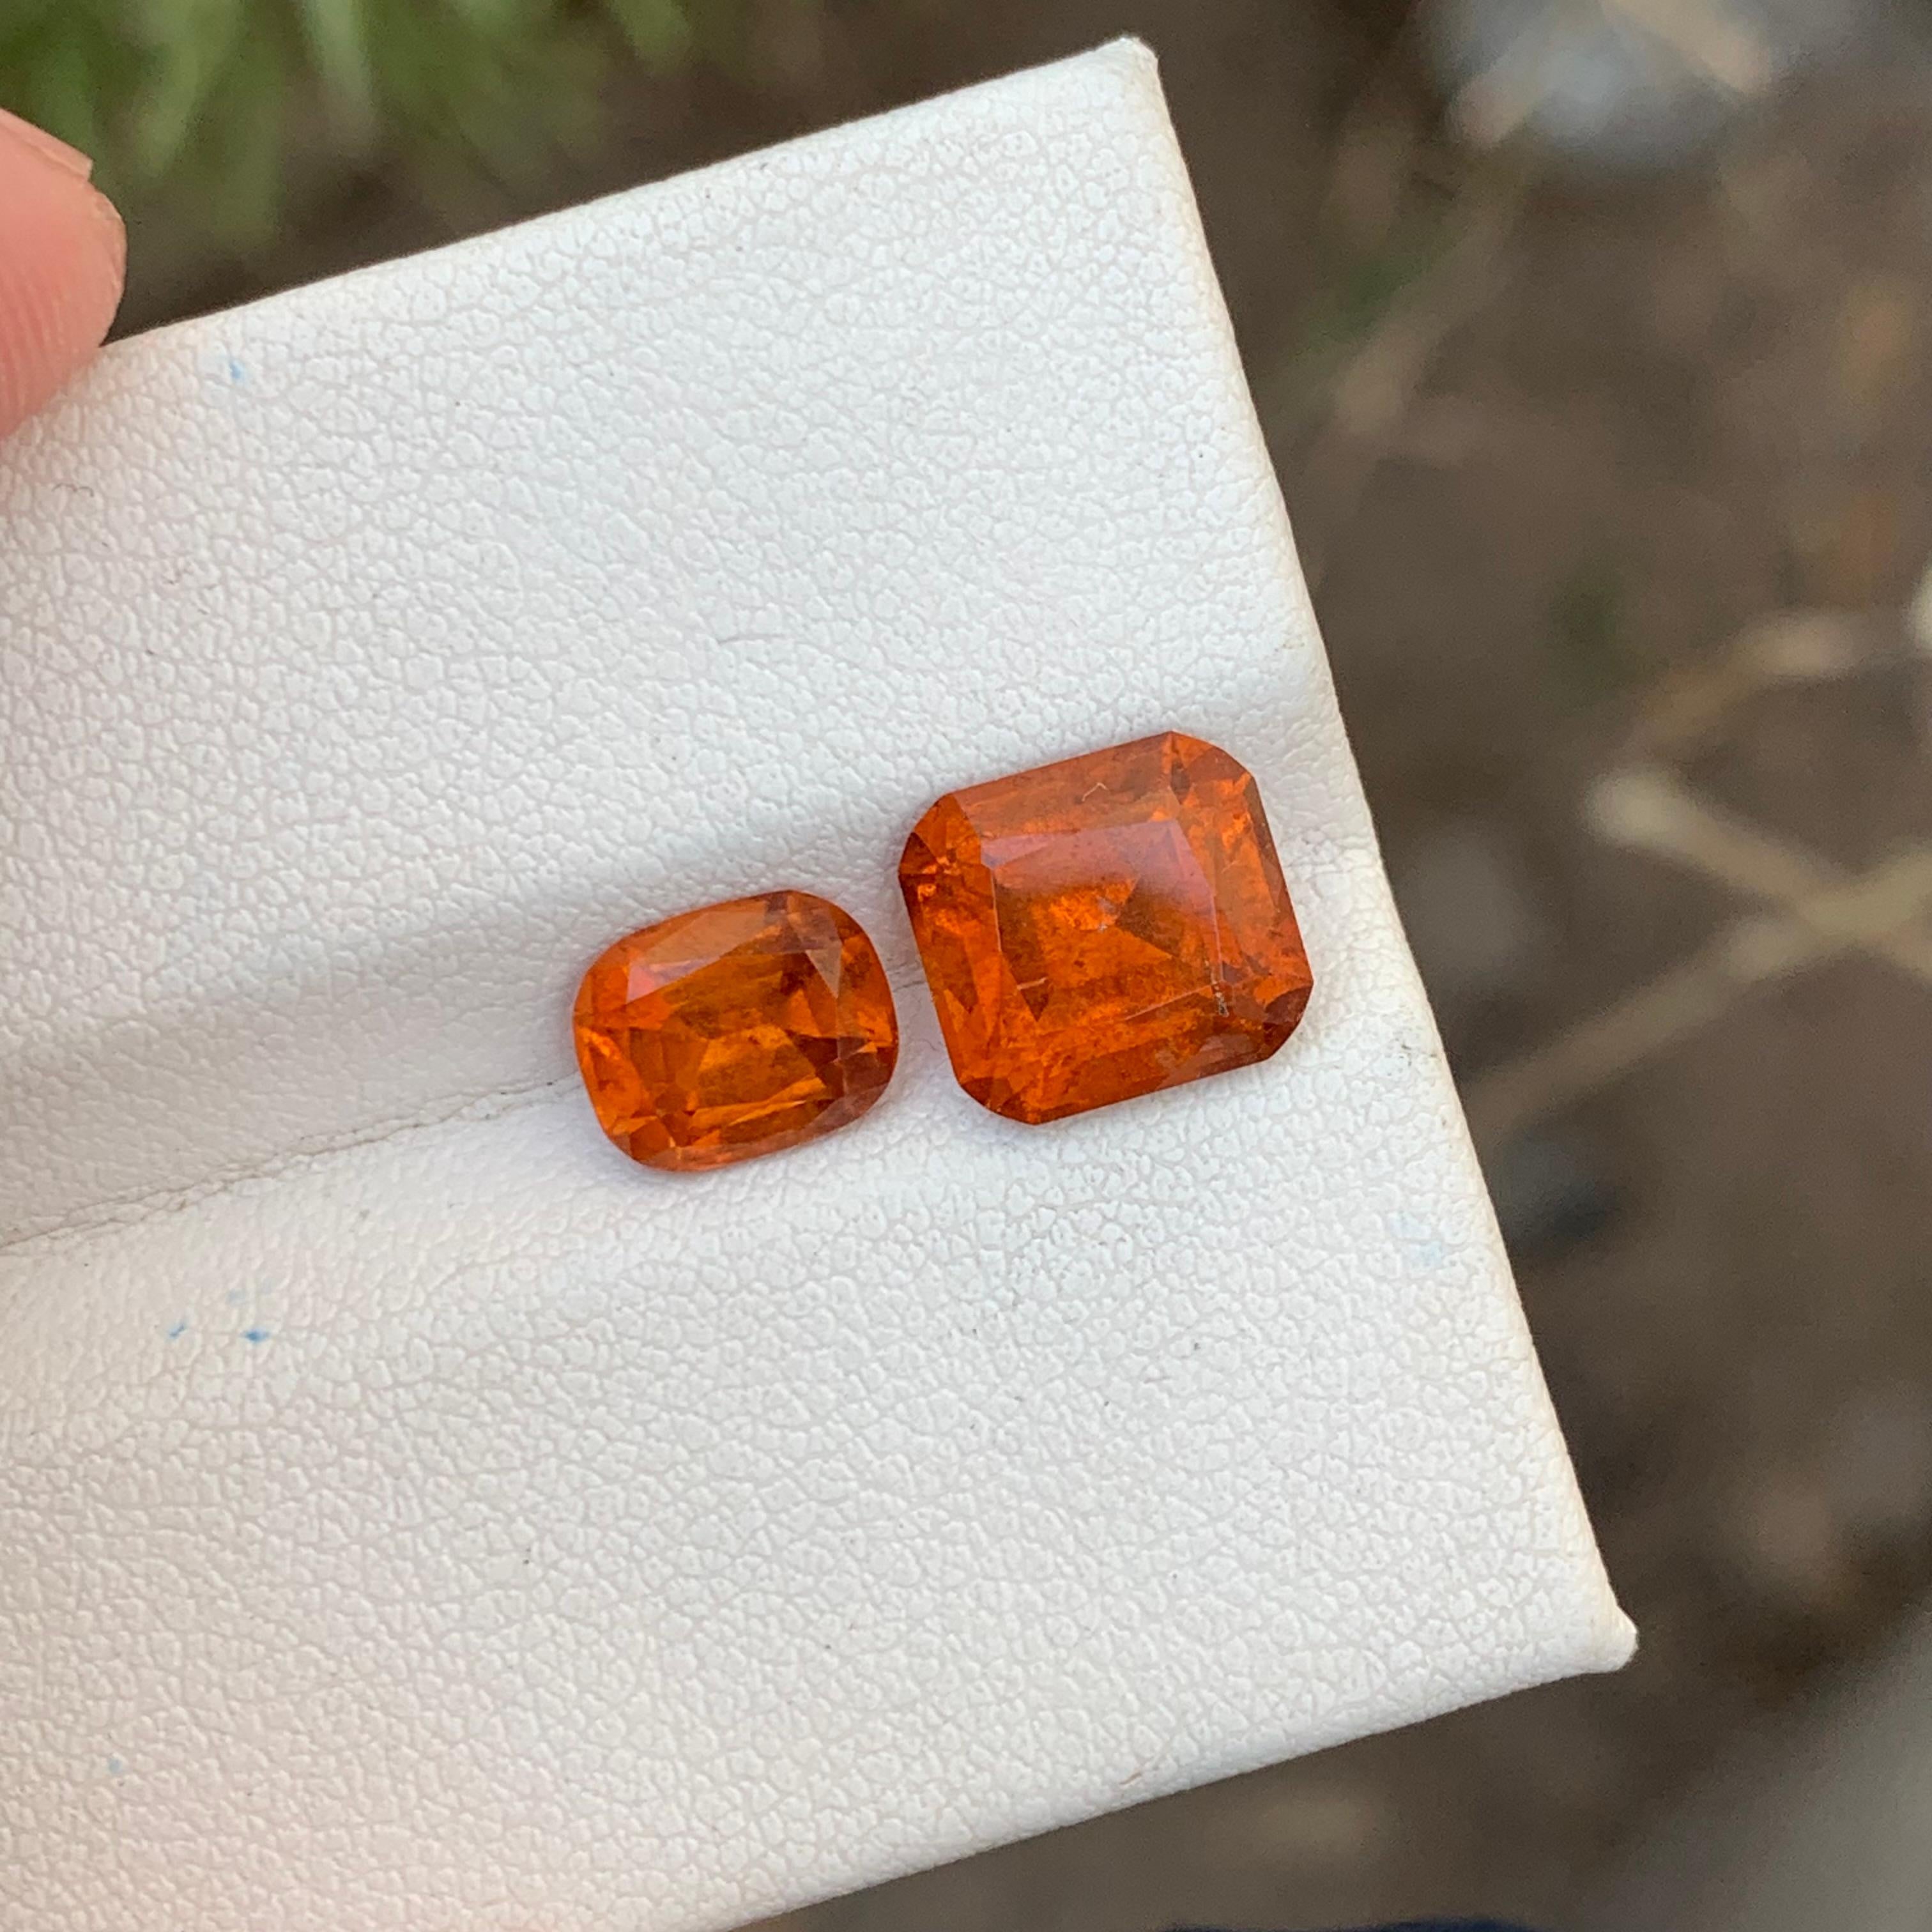 5.95 Carats Natural Loose Hessonite Garnet 2 Pieces For Ring Jewelry Making  en vente 2